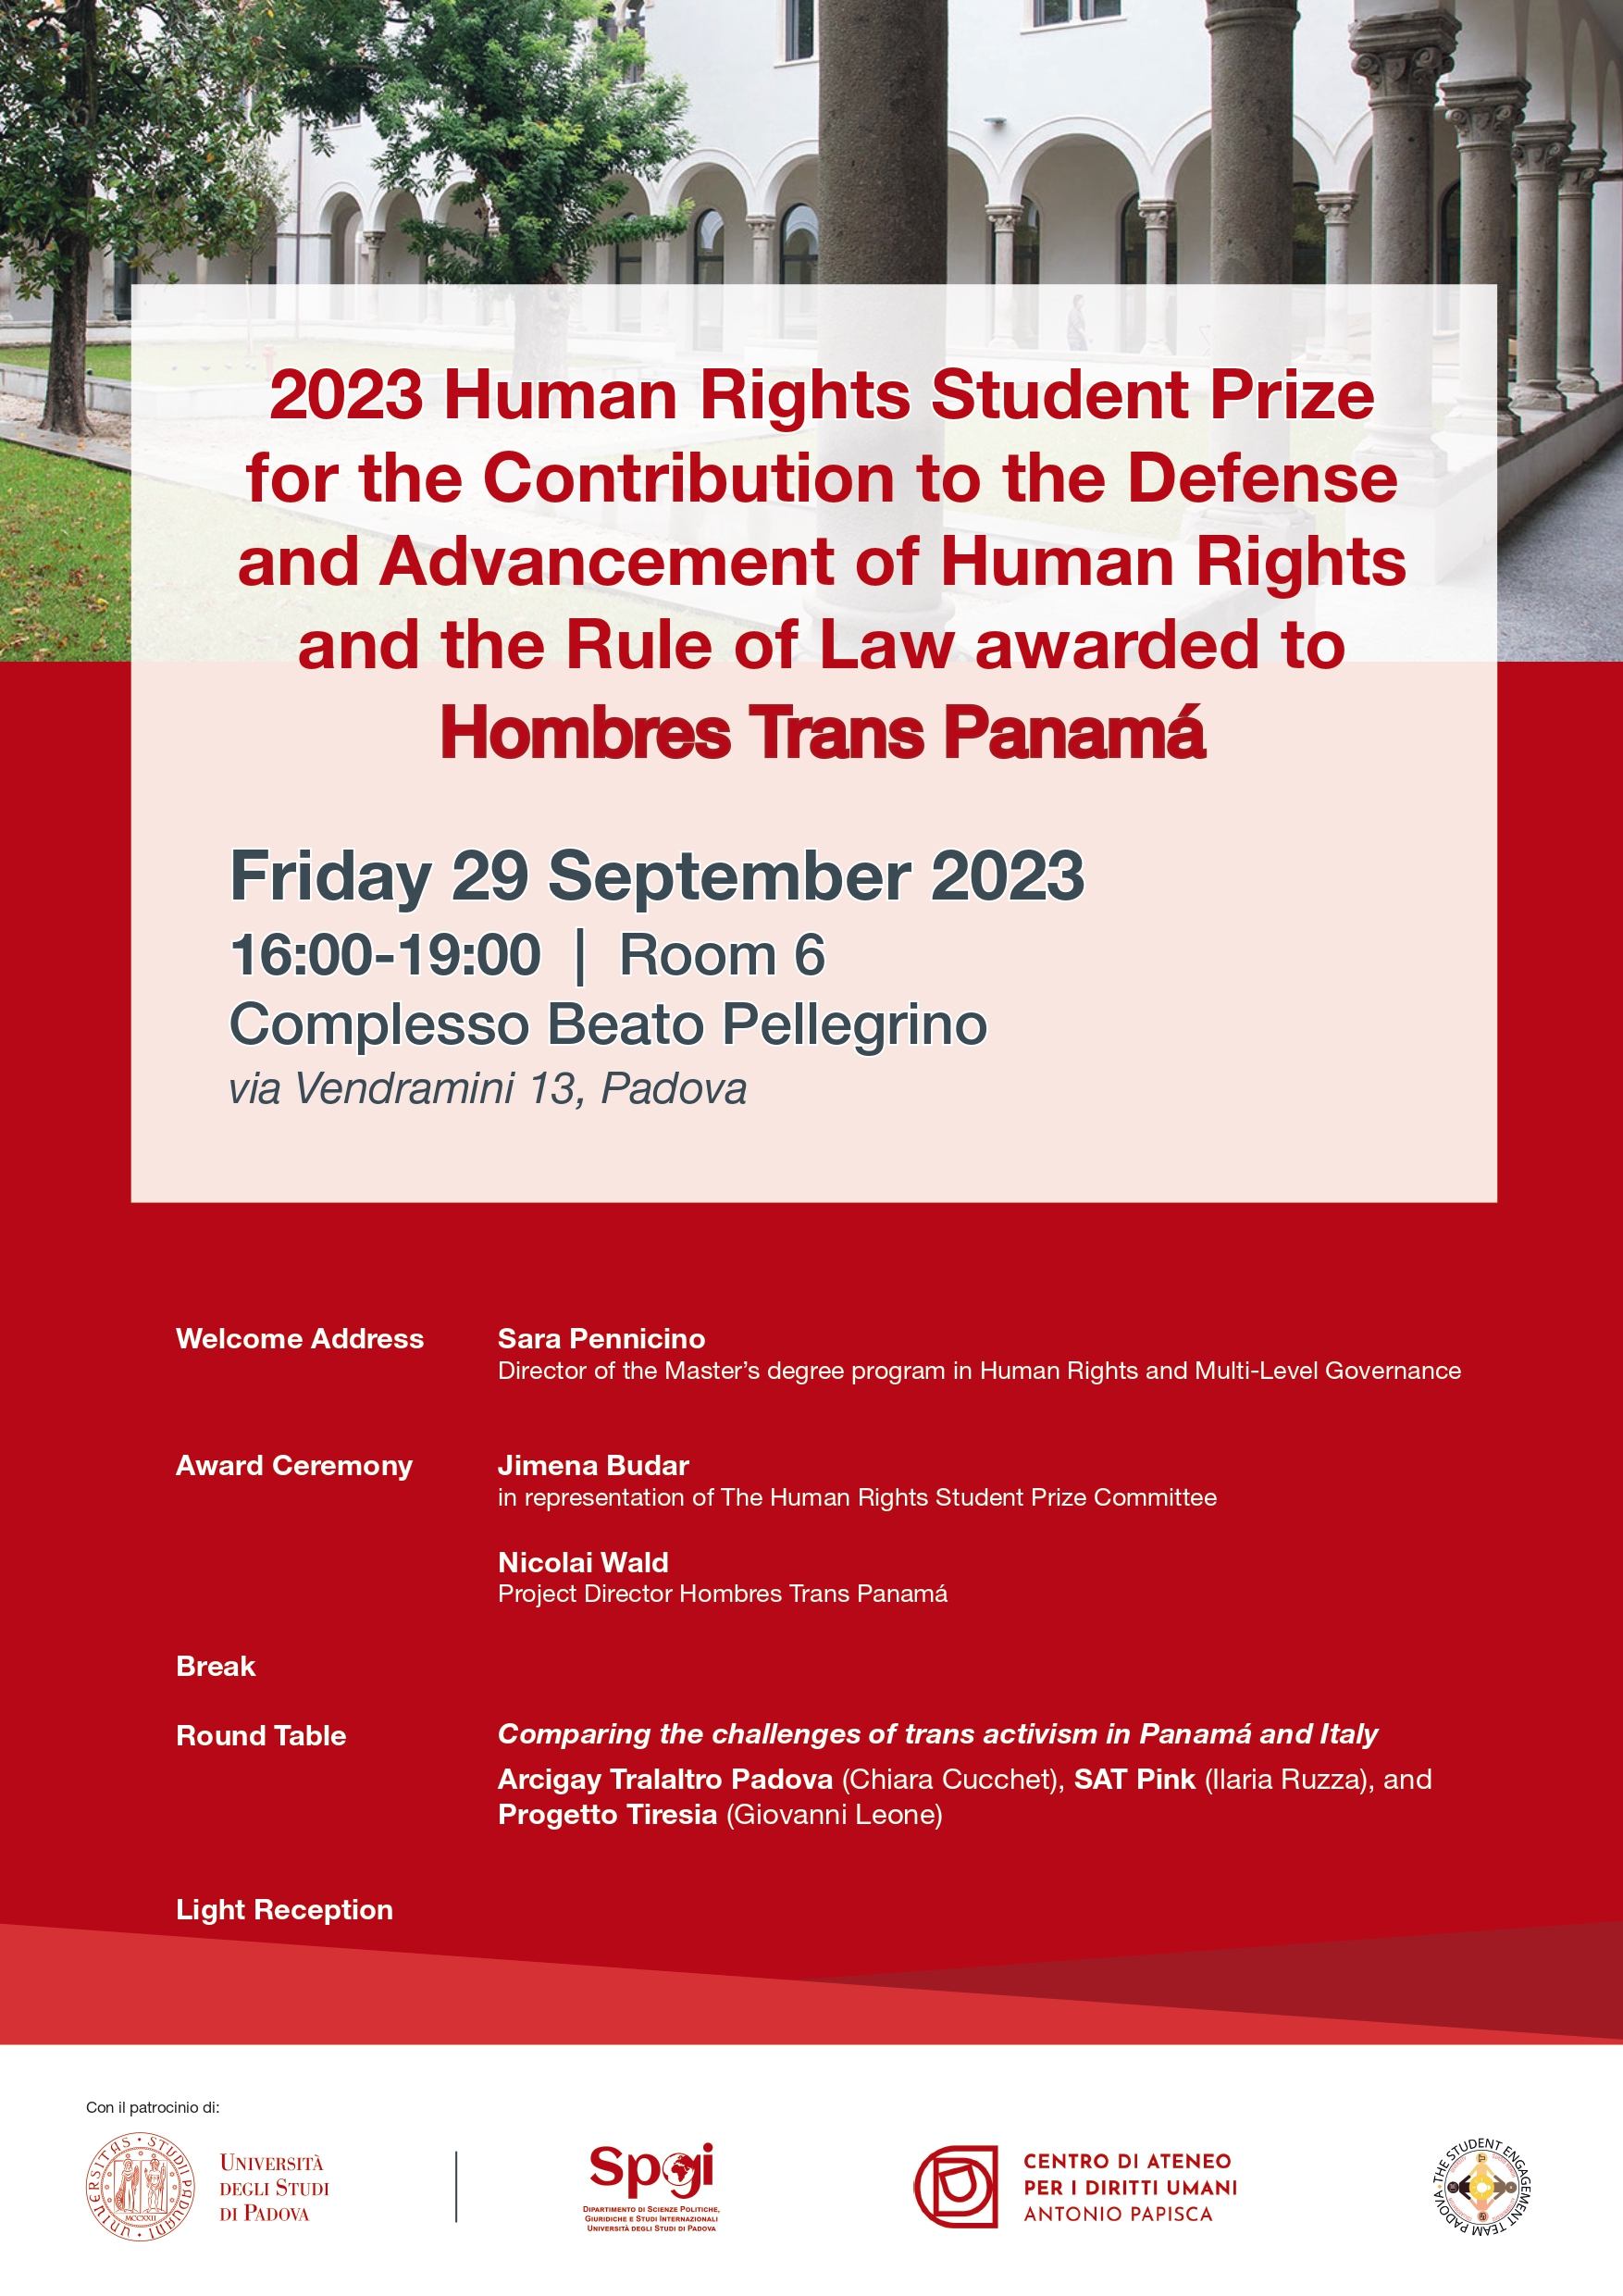 2023 Human Rights Student Prize for the Contribution to the Defense and Advancement of Human Rights and the Rule of Law awarded to Hombres Trans Panamá, Friday 29 September